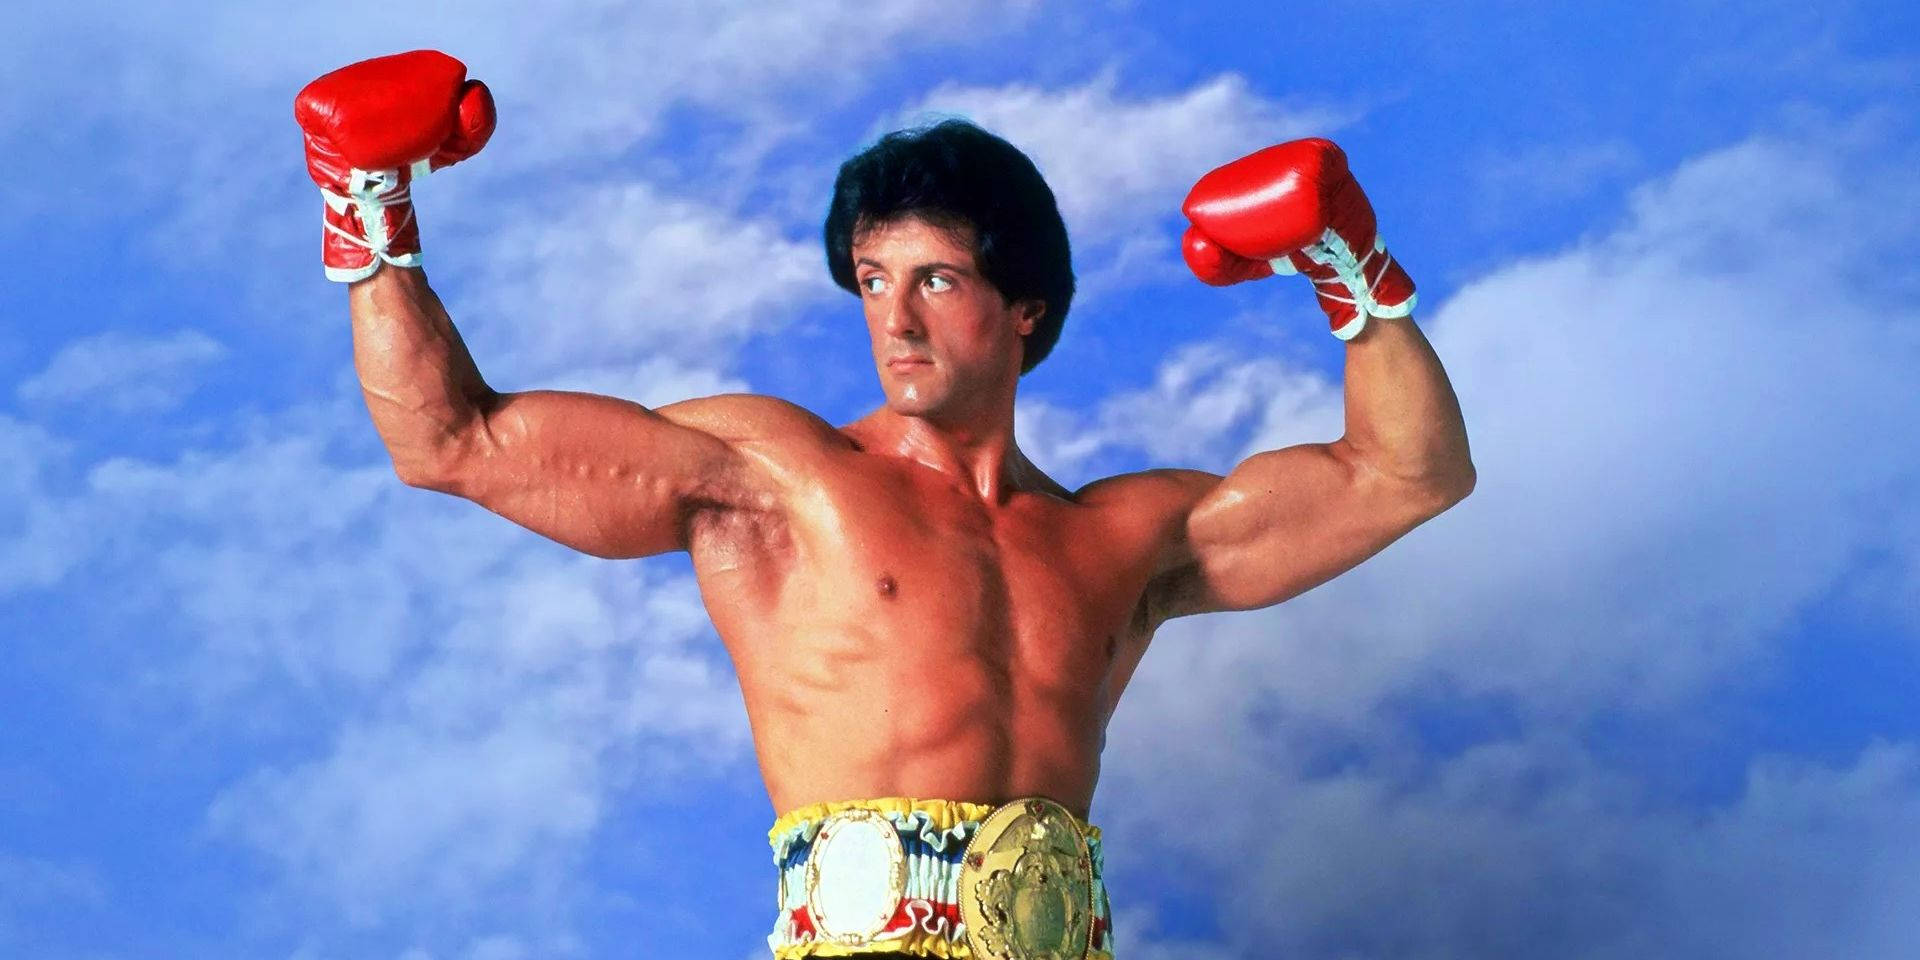 Action Superstar Sylvester Stallone Flaunting Boxing Gloves Wallpaper